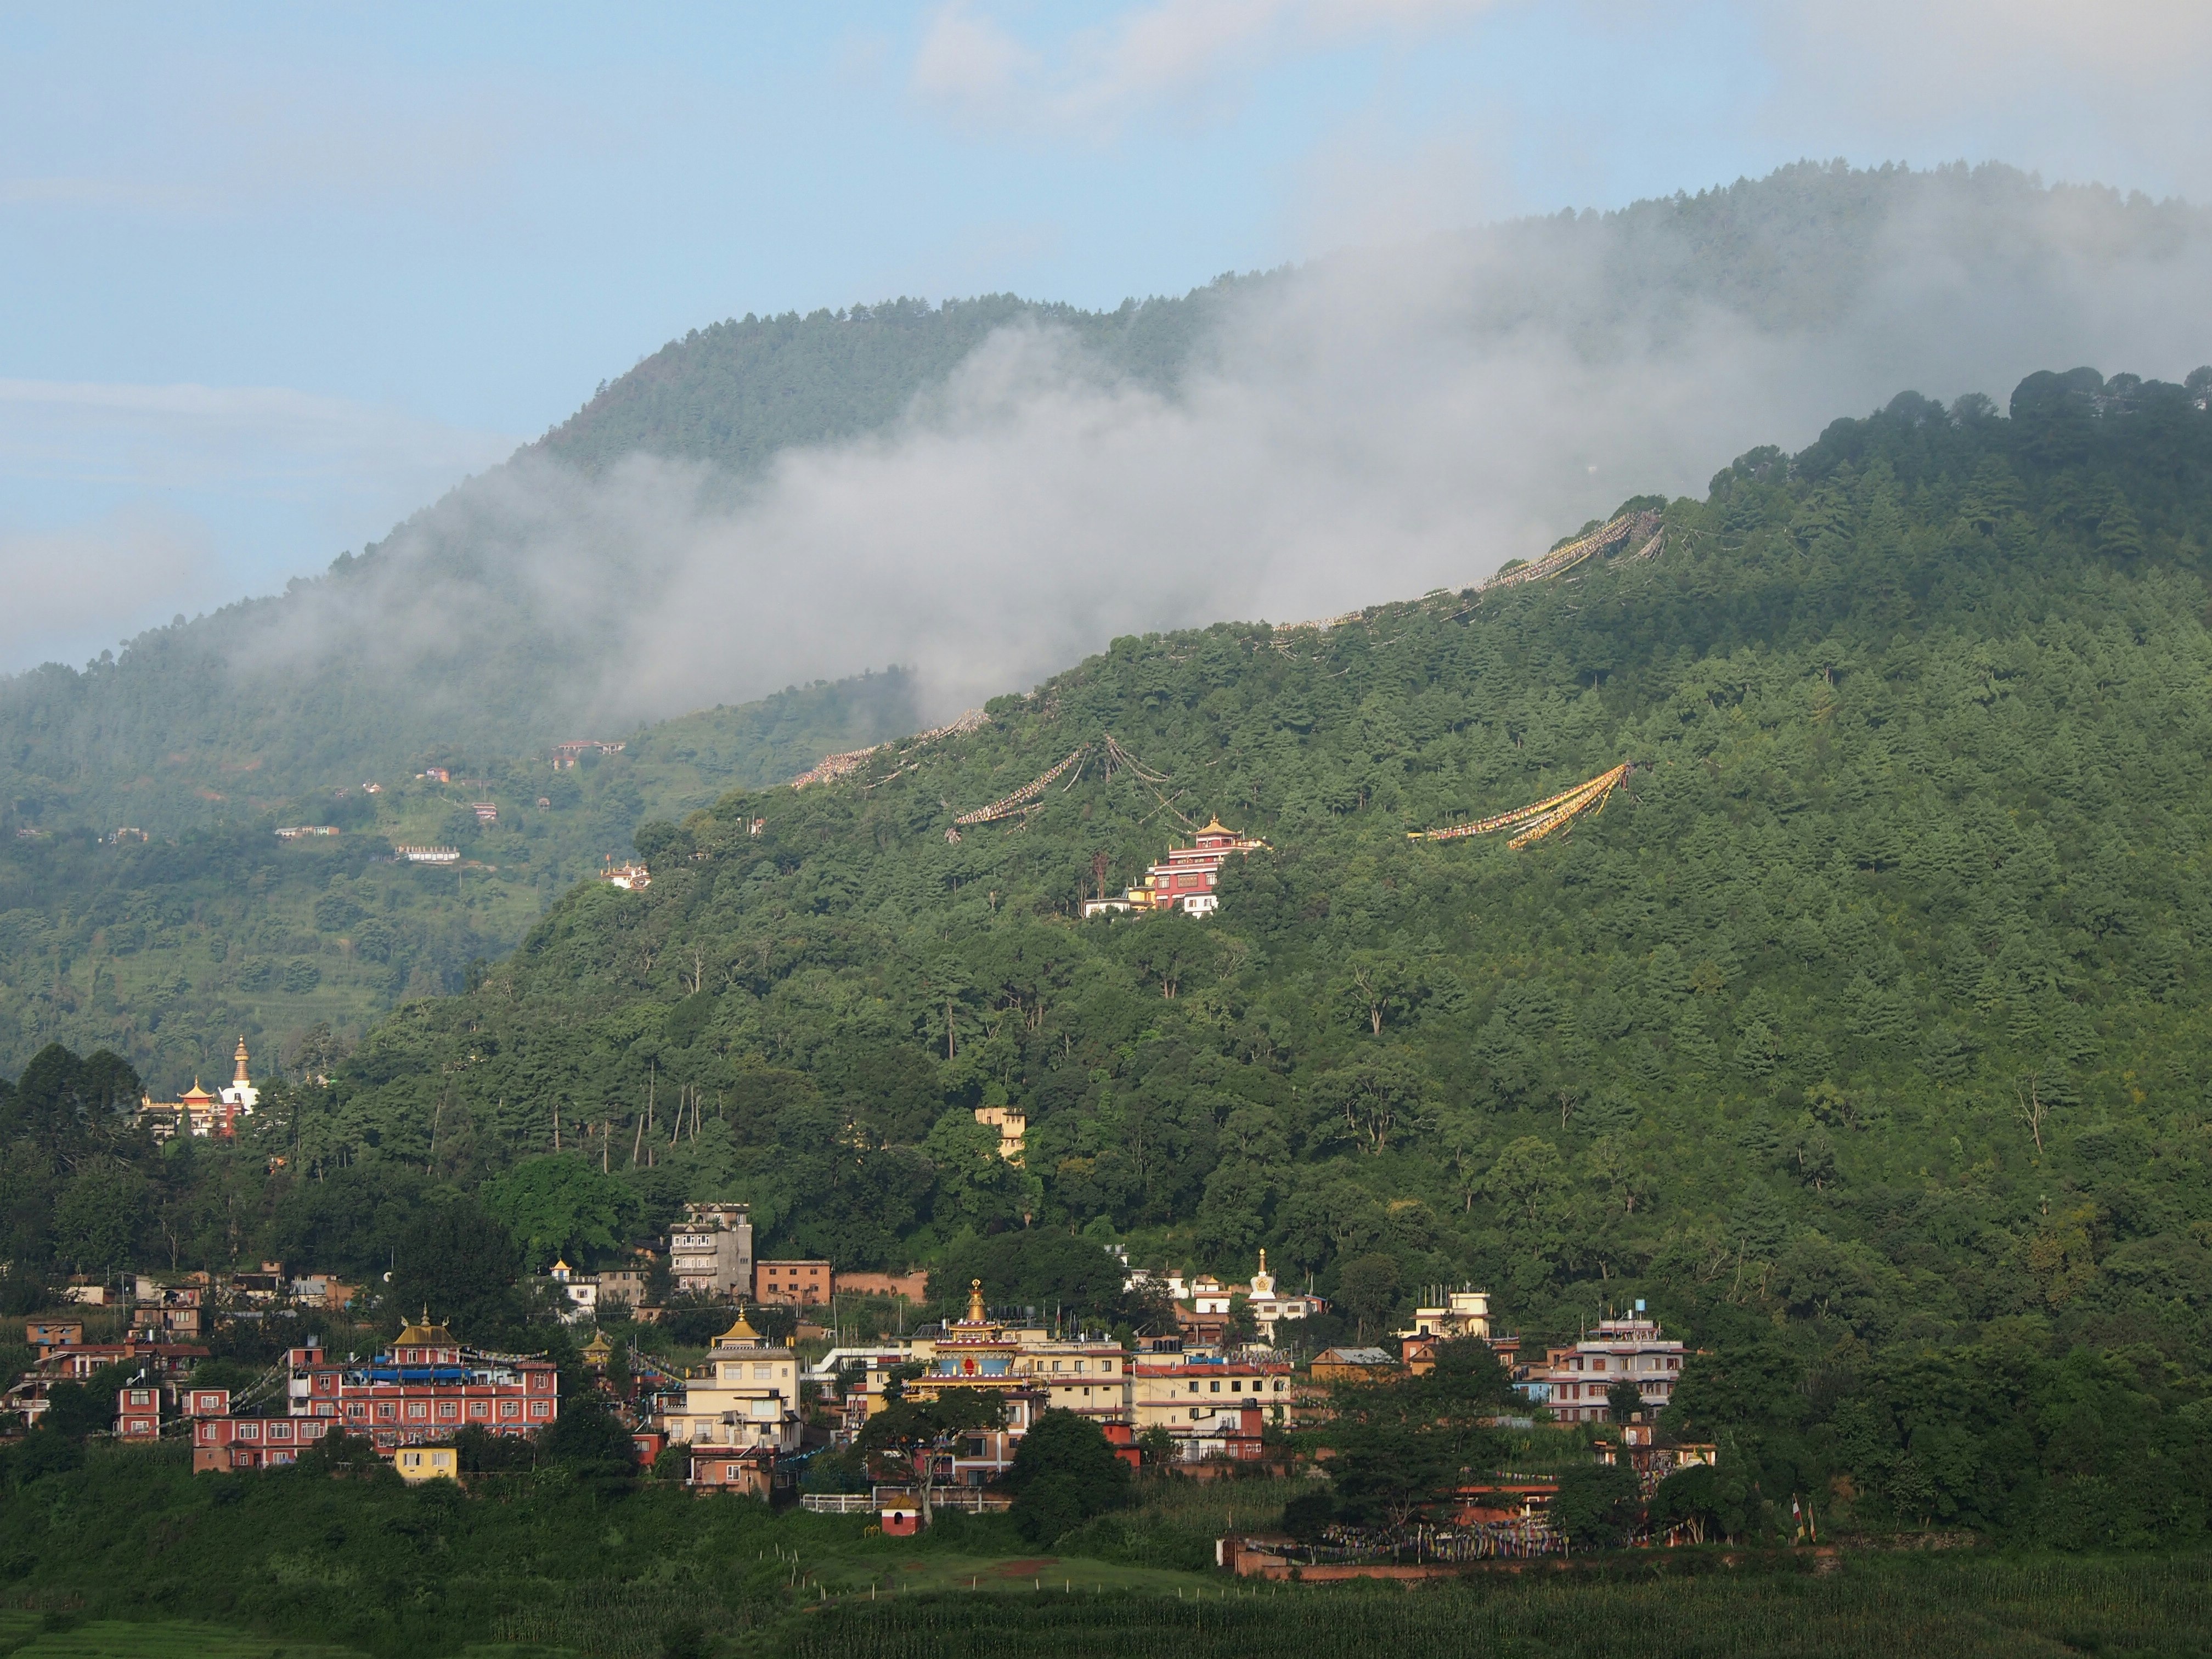 The small town of Pharping, deep in a Nepalese valley. Lush green trees surround a small cluster of buildings